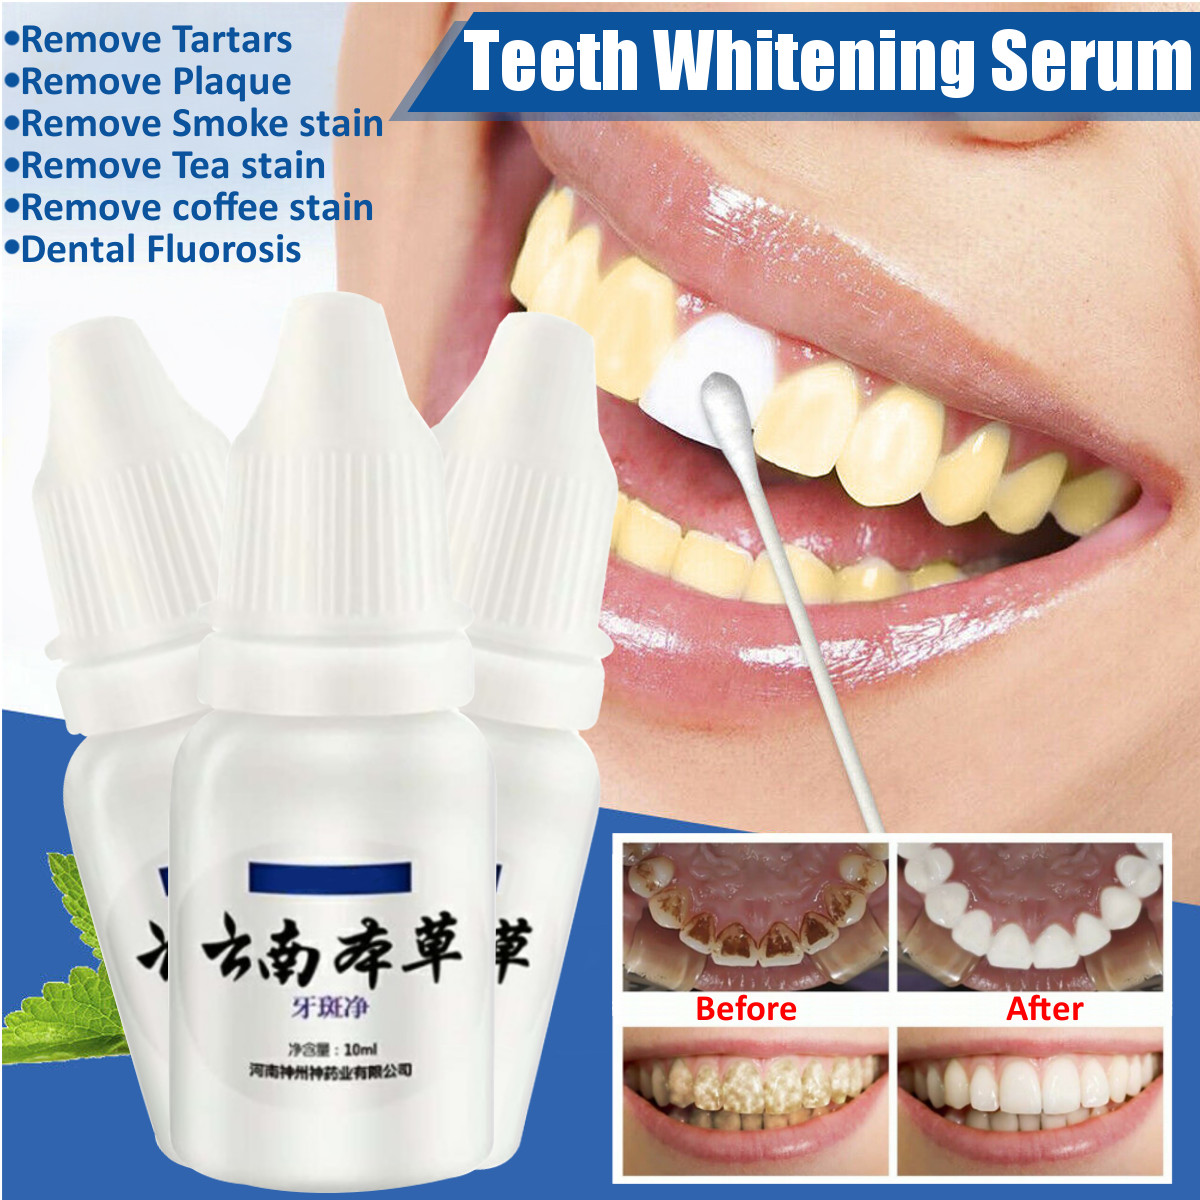 Herb-Teeth-Whitening-Cleansing-Serum-Essence-Oral-Hygiene-Effectively-Removes-Tartars-Plaque-Stains--1815887-1